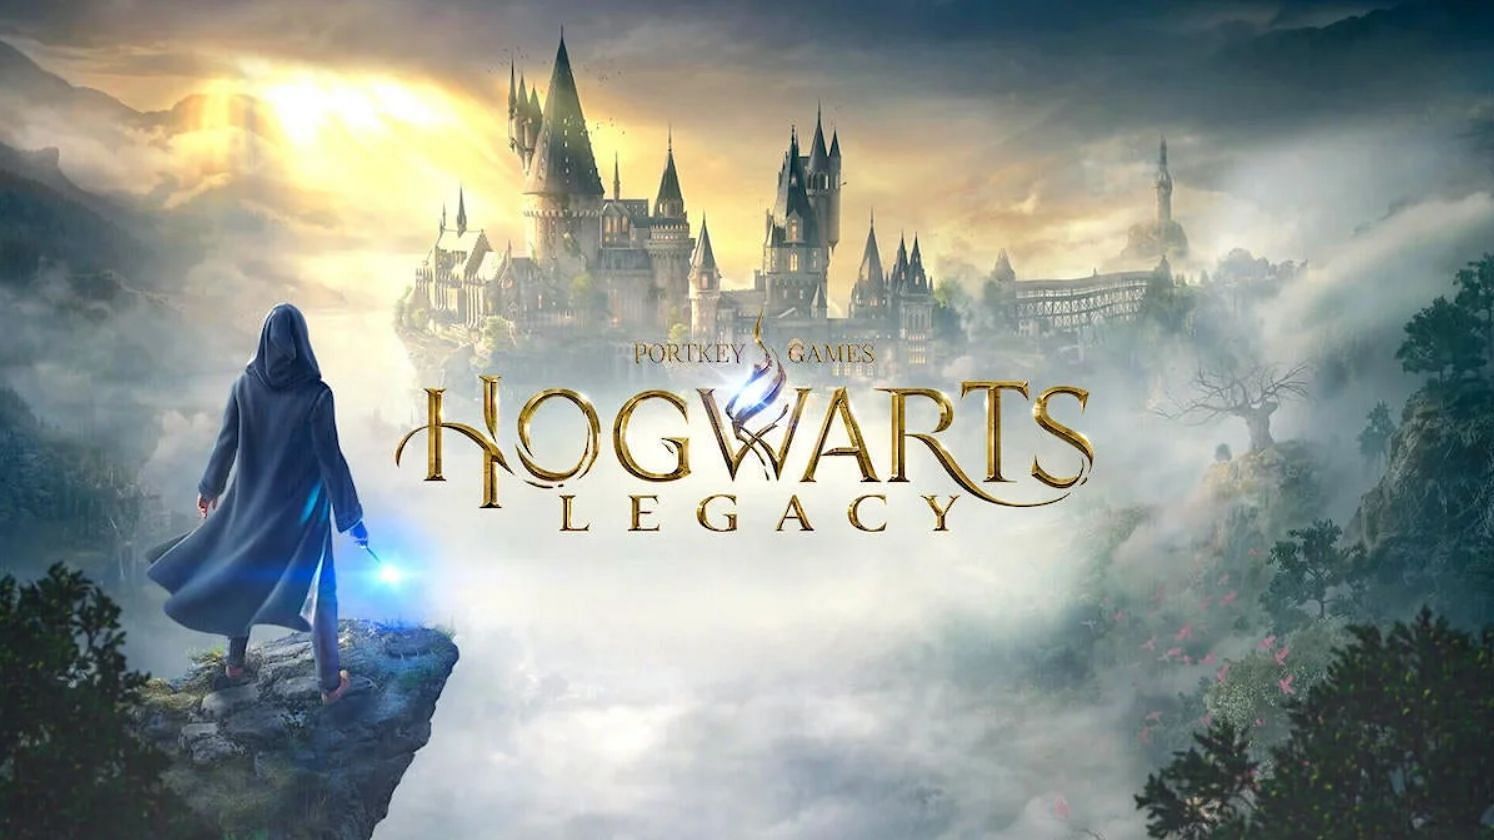 Hogwarts Legacy promises to let people be the witches and wizards they always dreamed they were (image credits Warner Bros)